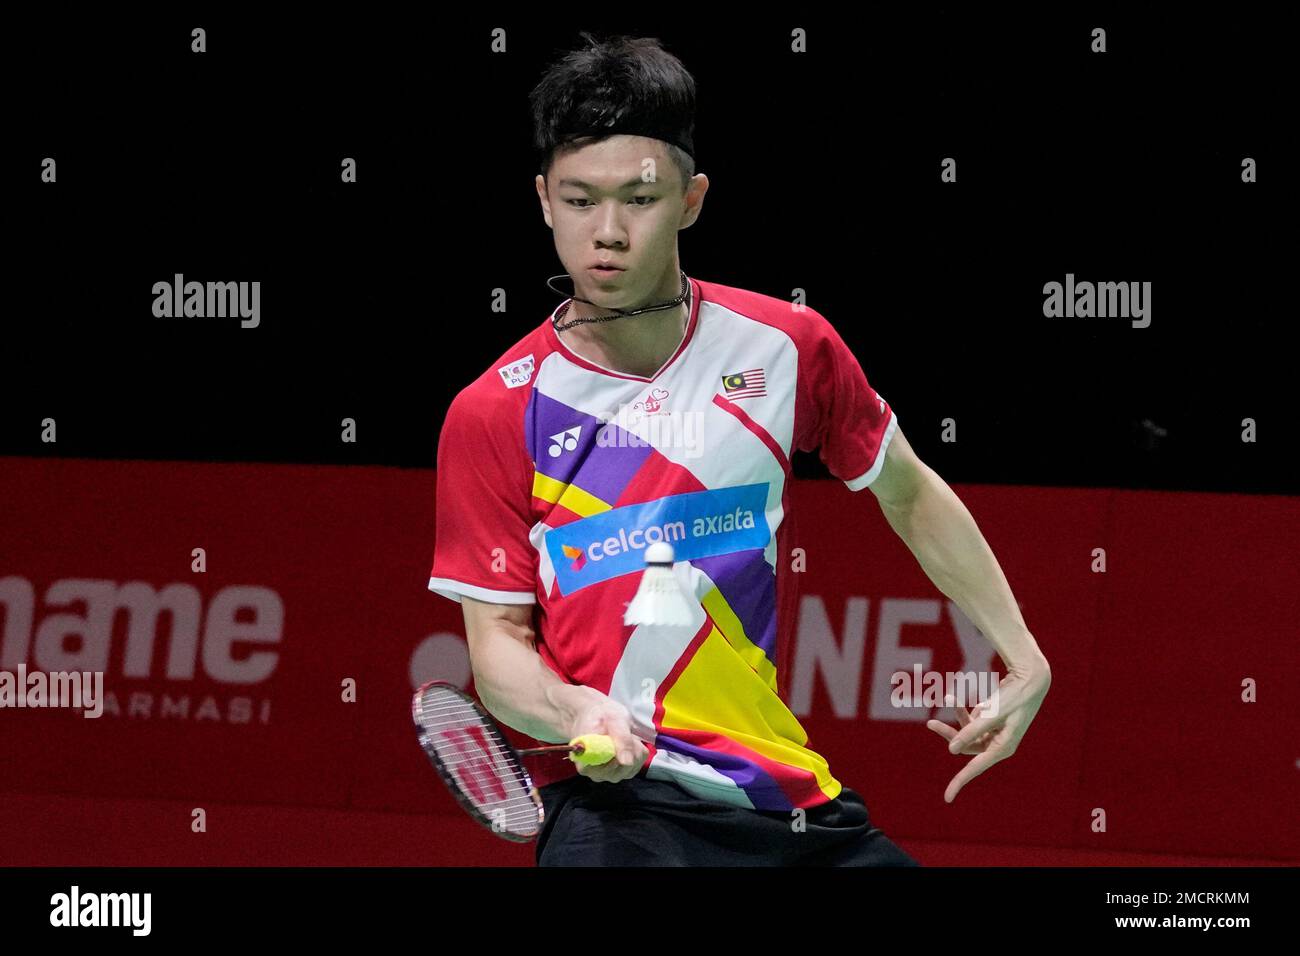 Malaysias Lee Zii Jia competes against France Toma Junior Popov during their mens singles badminton group stage match at the BWF World Tour Finalsin Nusa Dua, Bali, Indonesia, Thursday, Dec